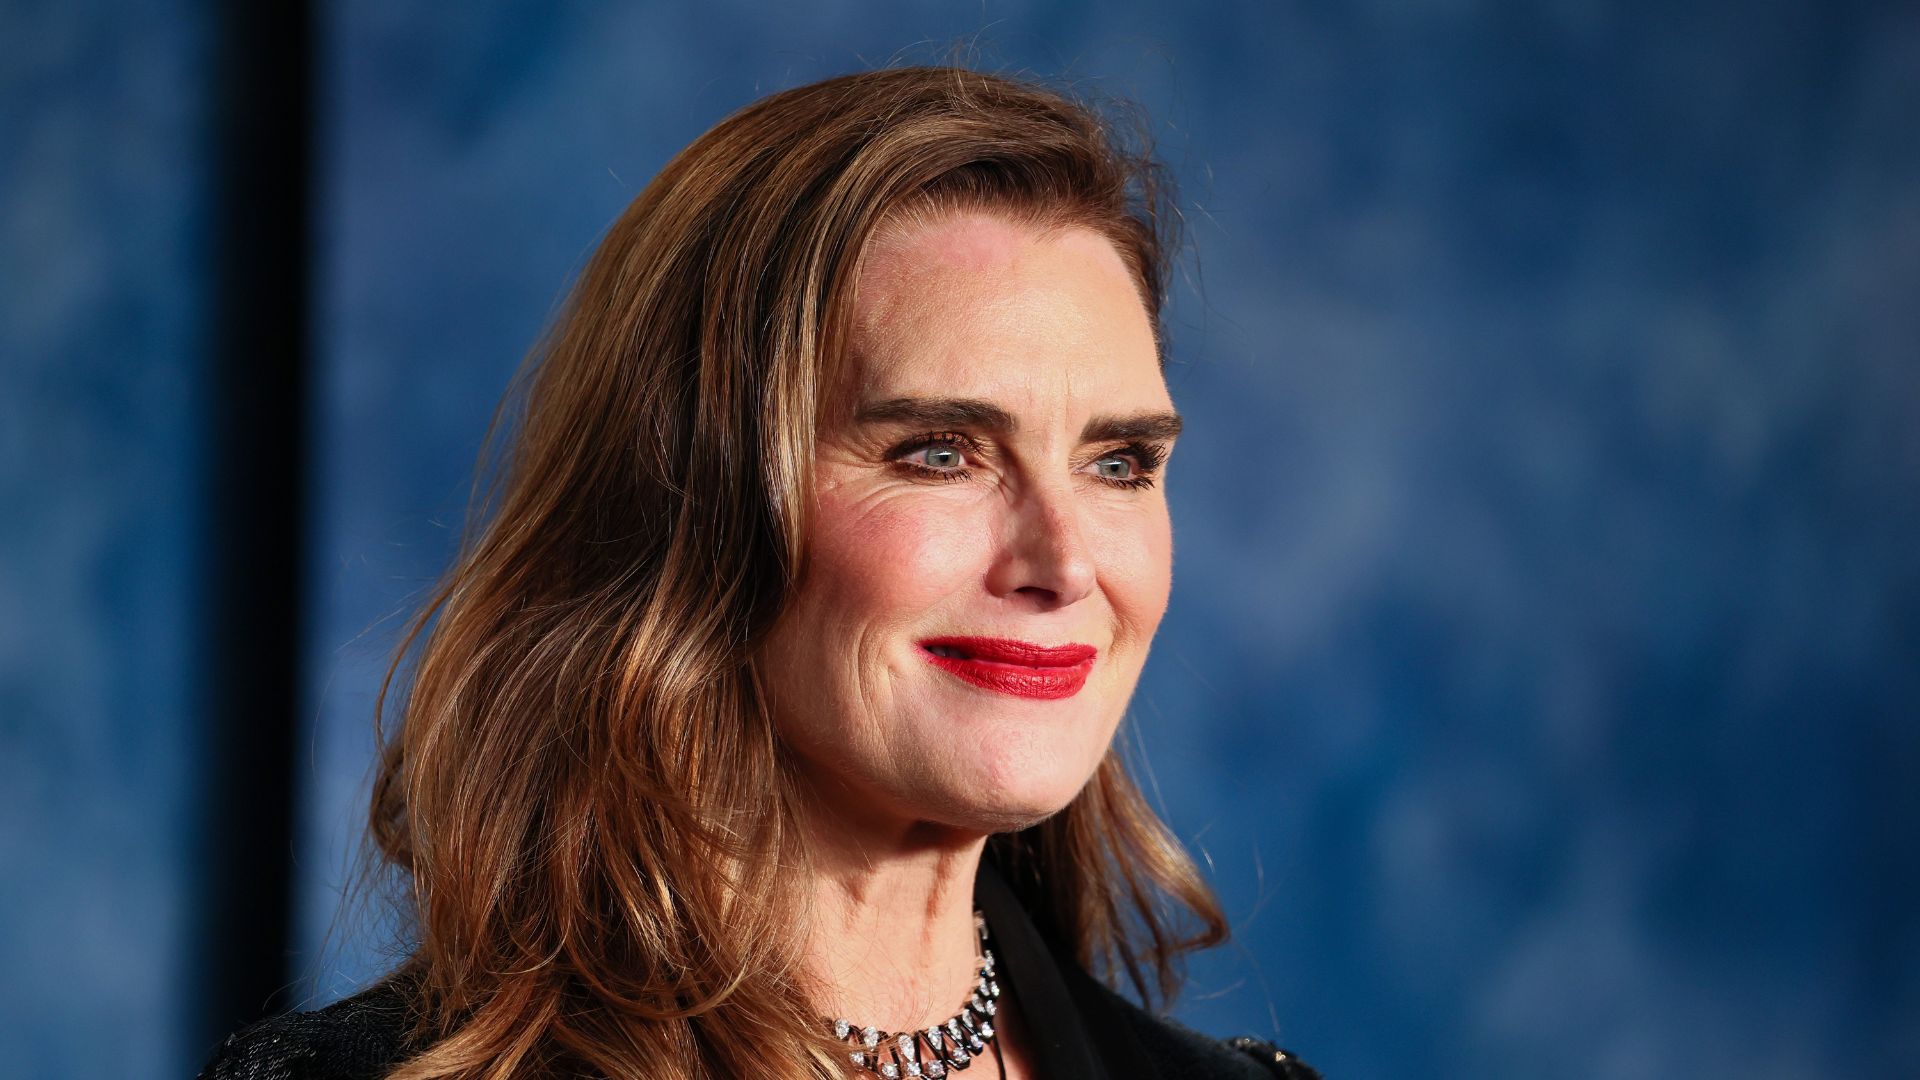 Hoe Brooke - Brooke Shields on her mother encouraging her to pose nude | Woman & Home